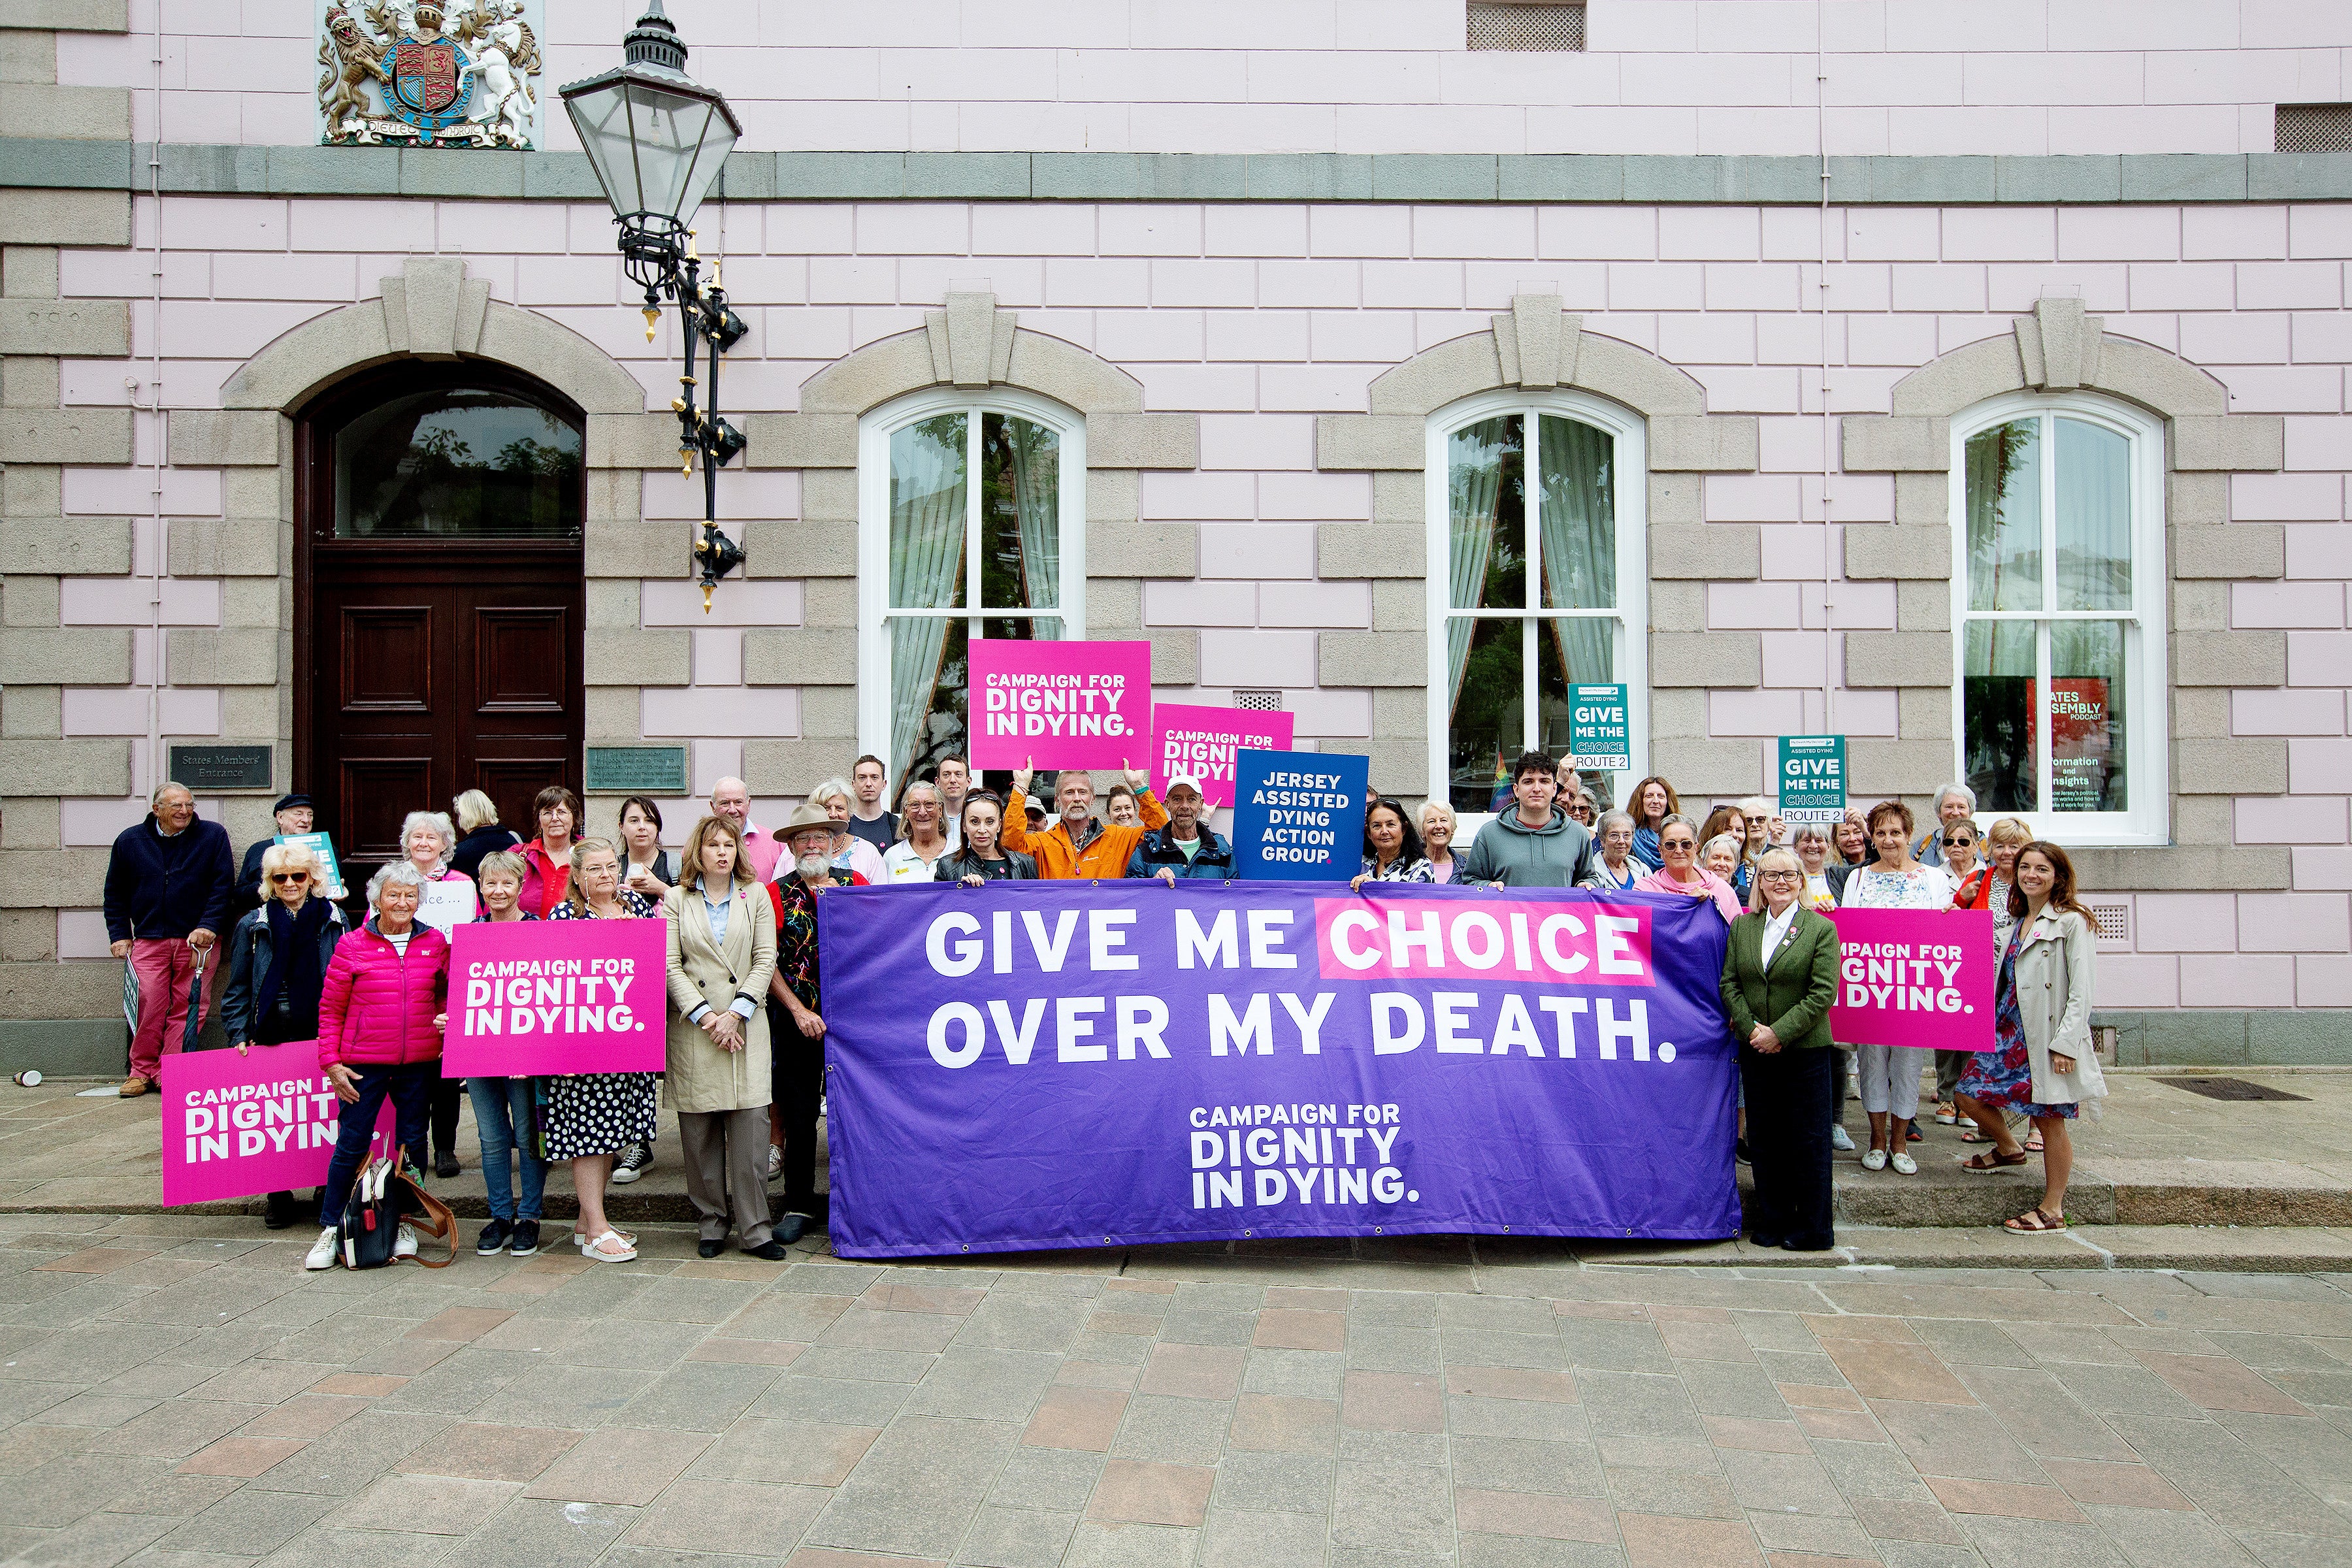 jersey, assisted dying, parliament, jersey set to move ahead with allowing assisted dying for terminally ill people